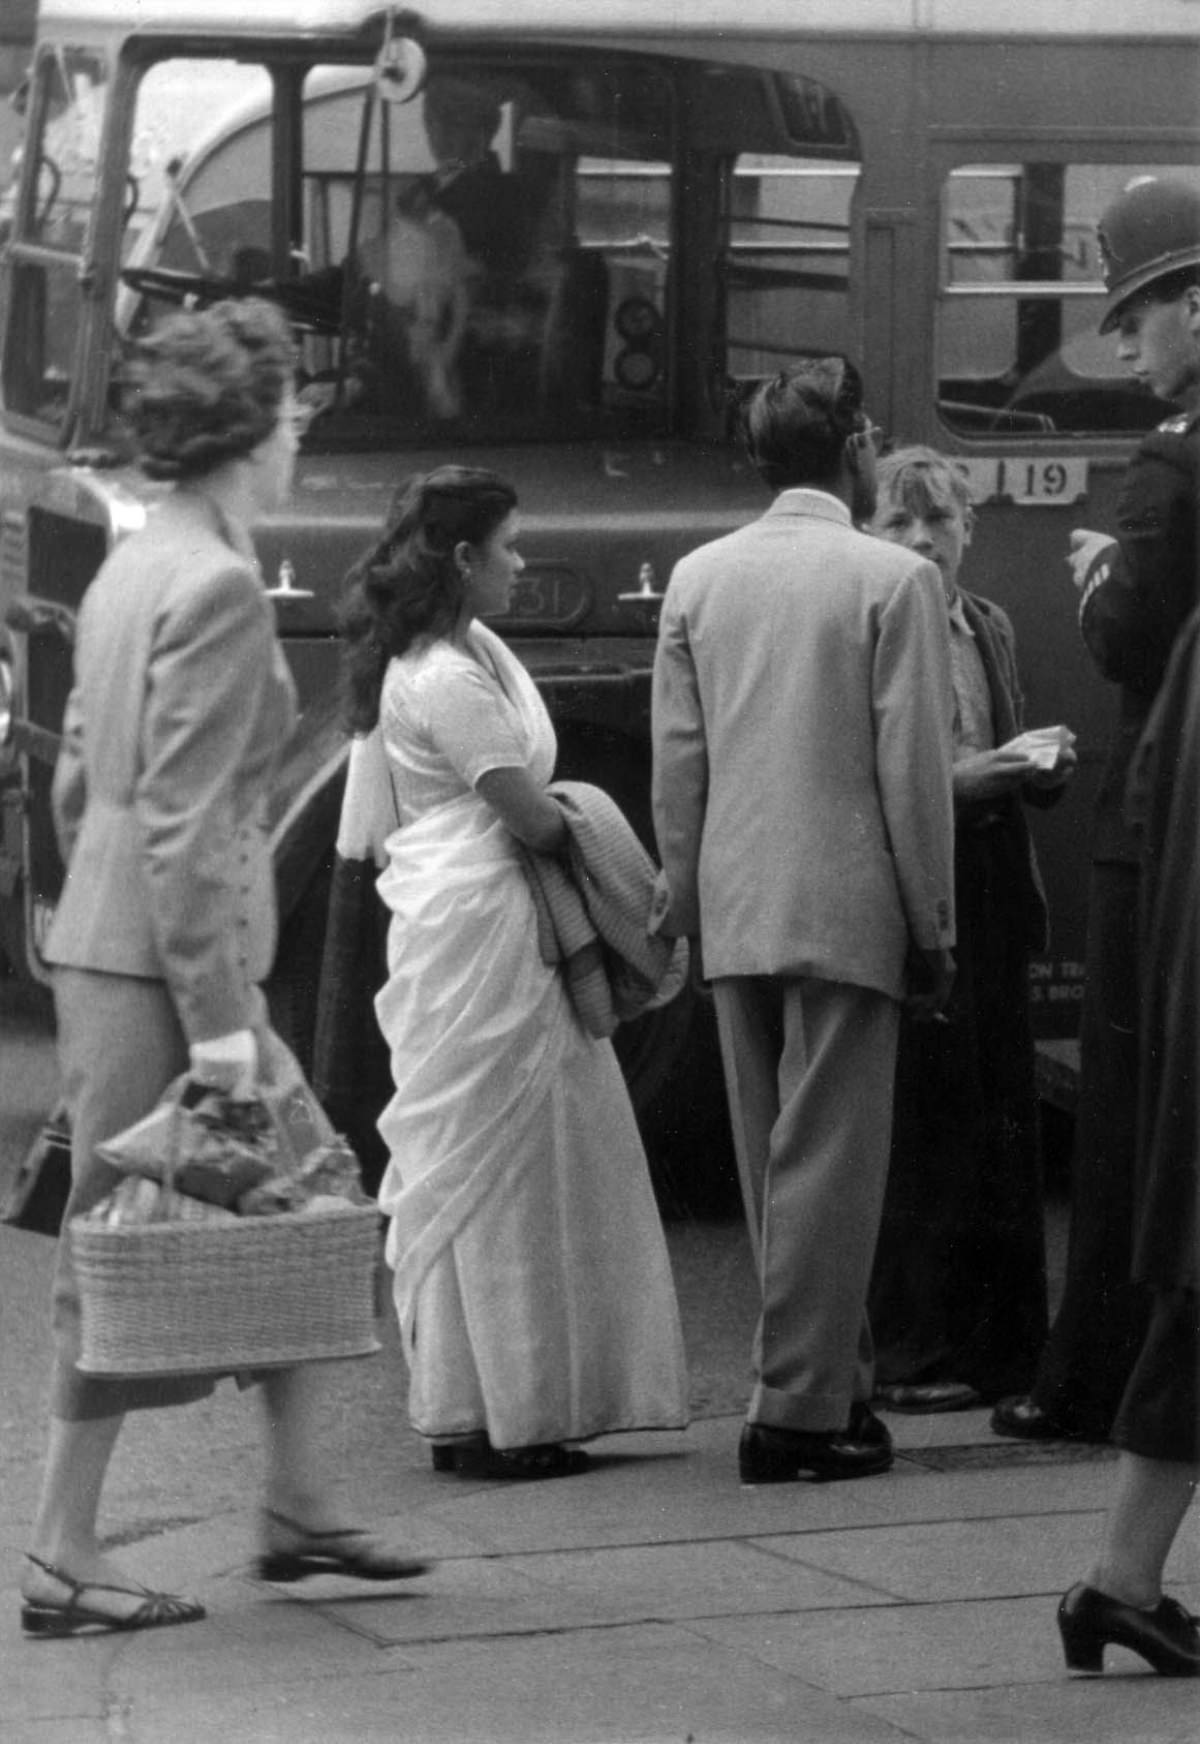 Street Life of London in the Summer of 1954 Through These Fascinating Vintage Photos